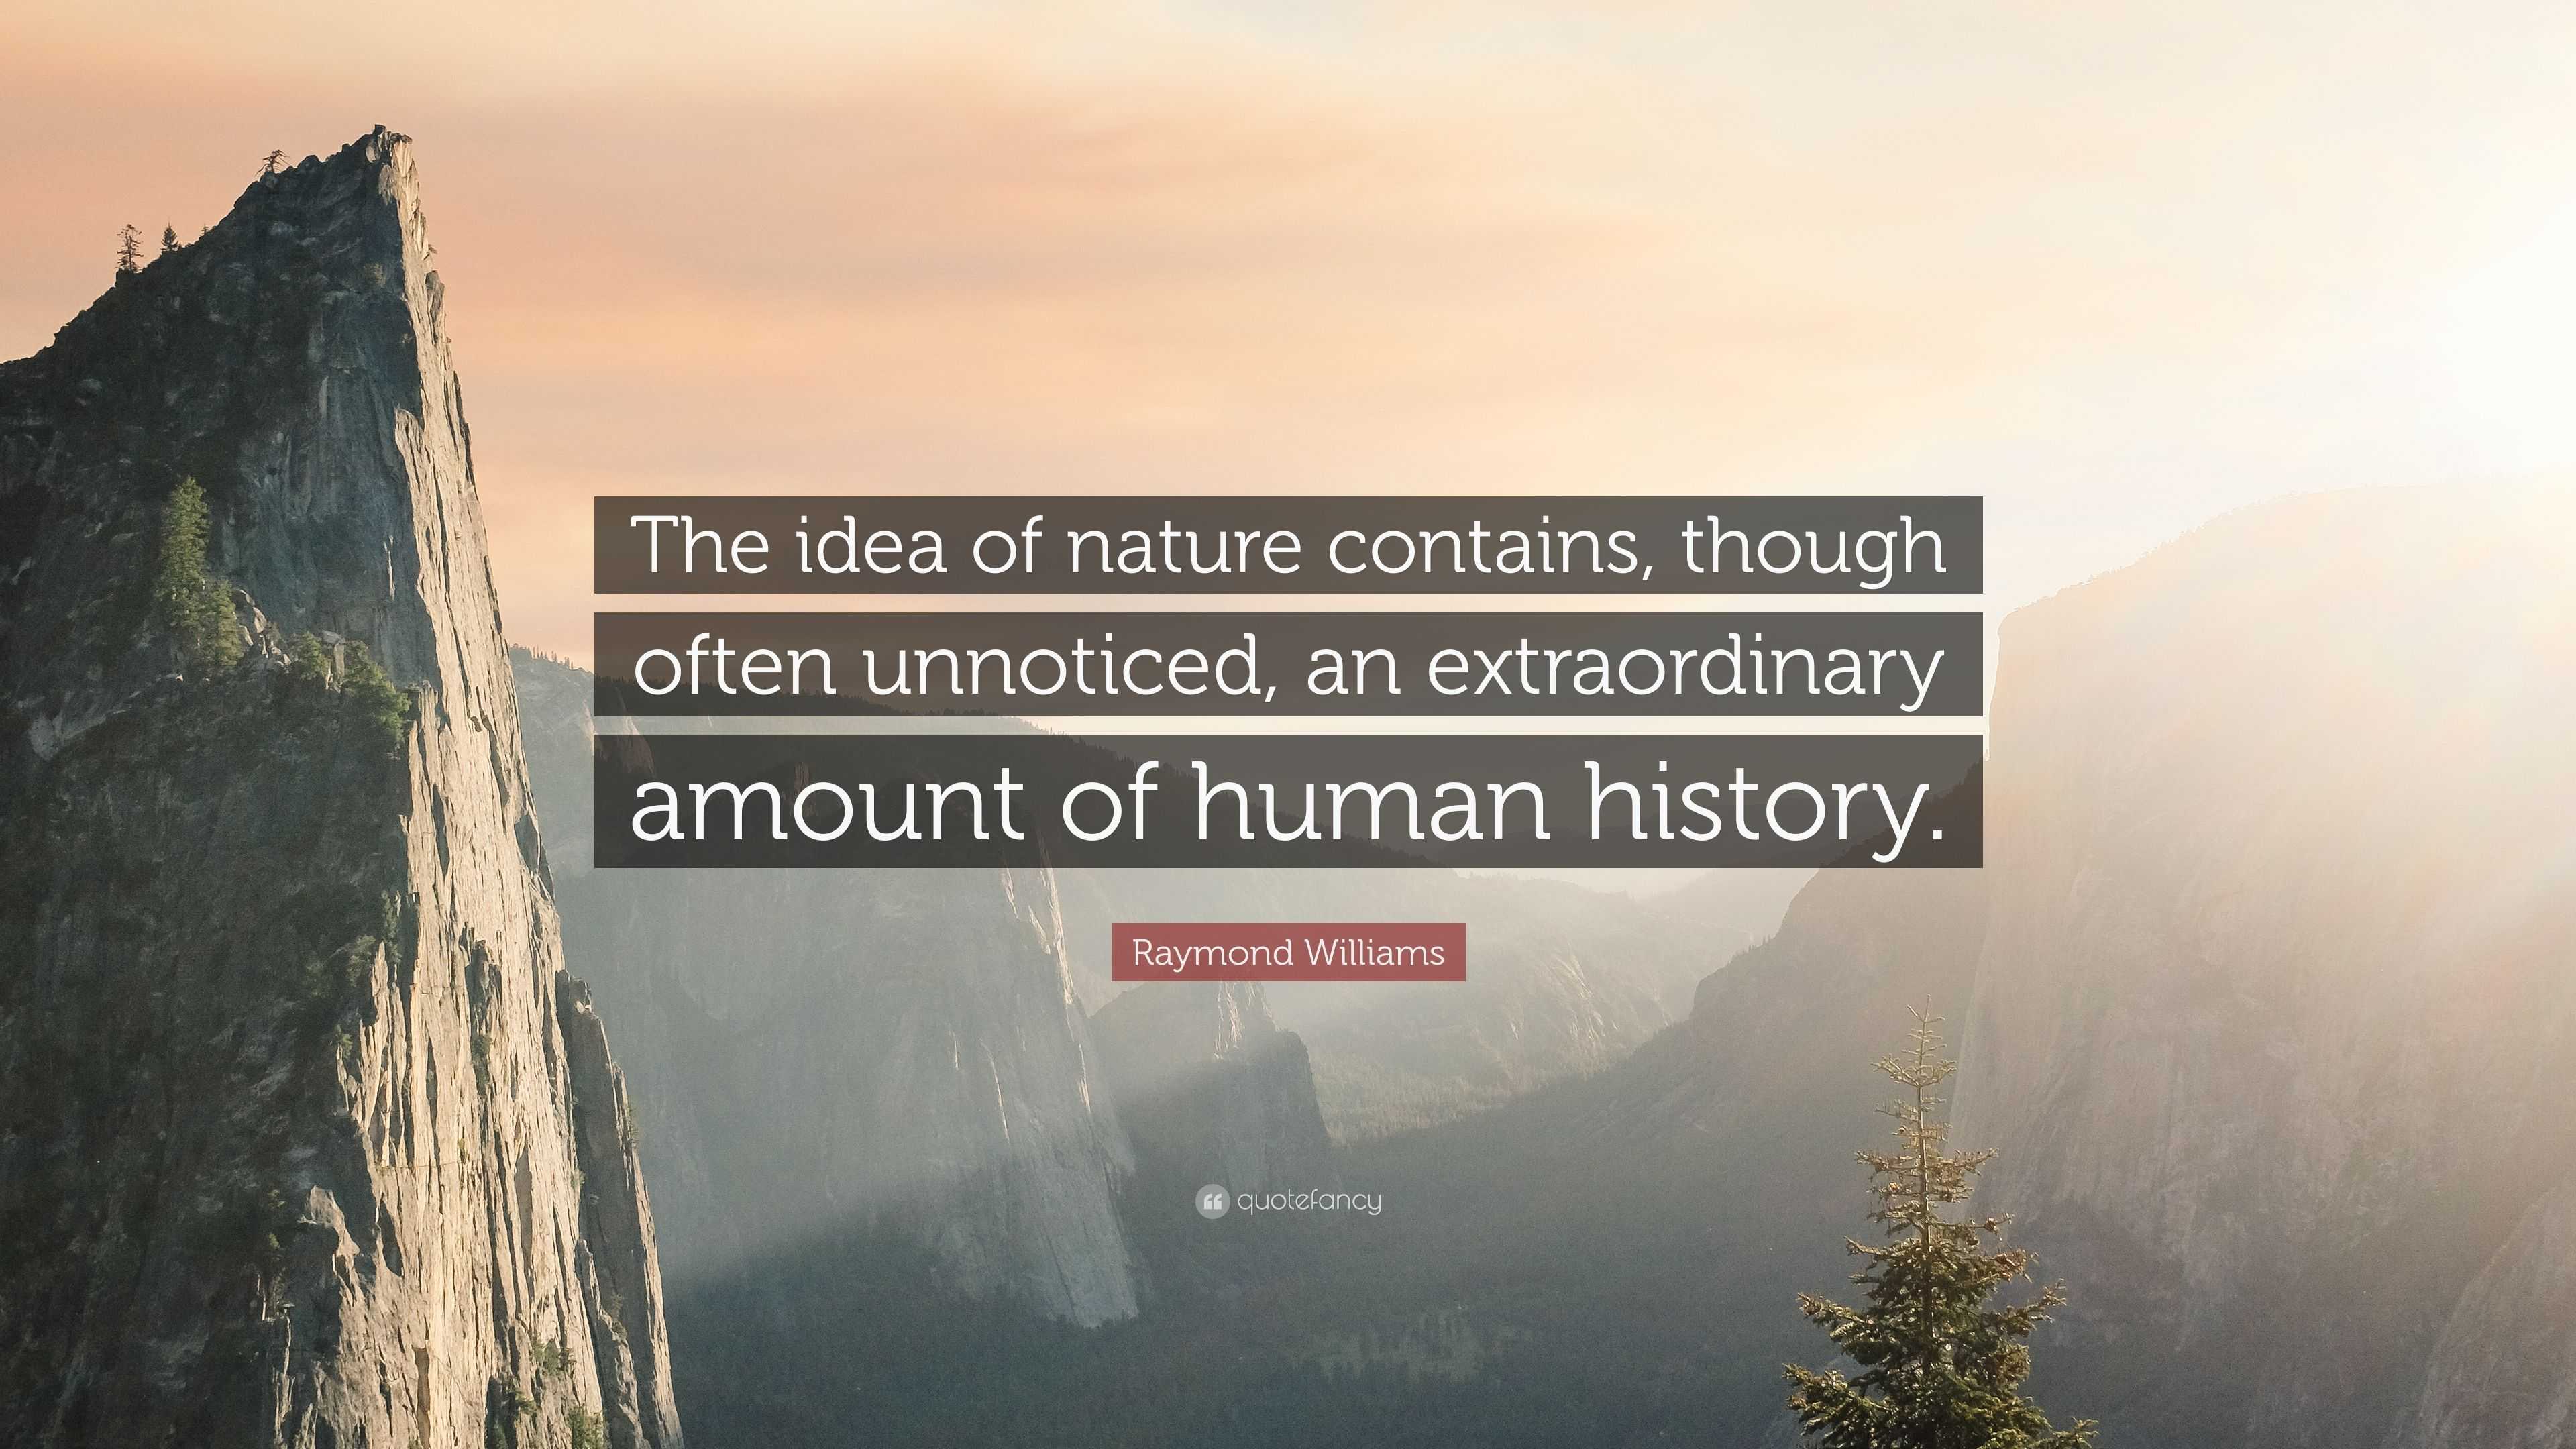 Raymond Williams Quote: “The idea of nature contains, though often unnoticed, extraordinary amount of human